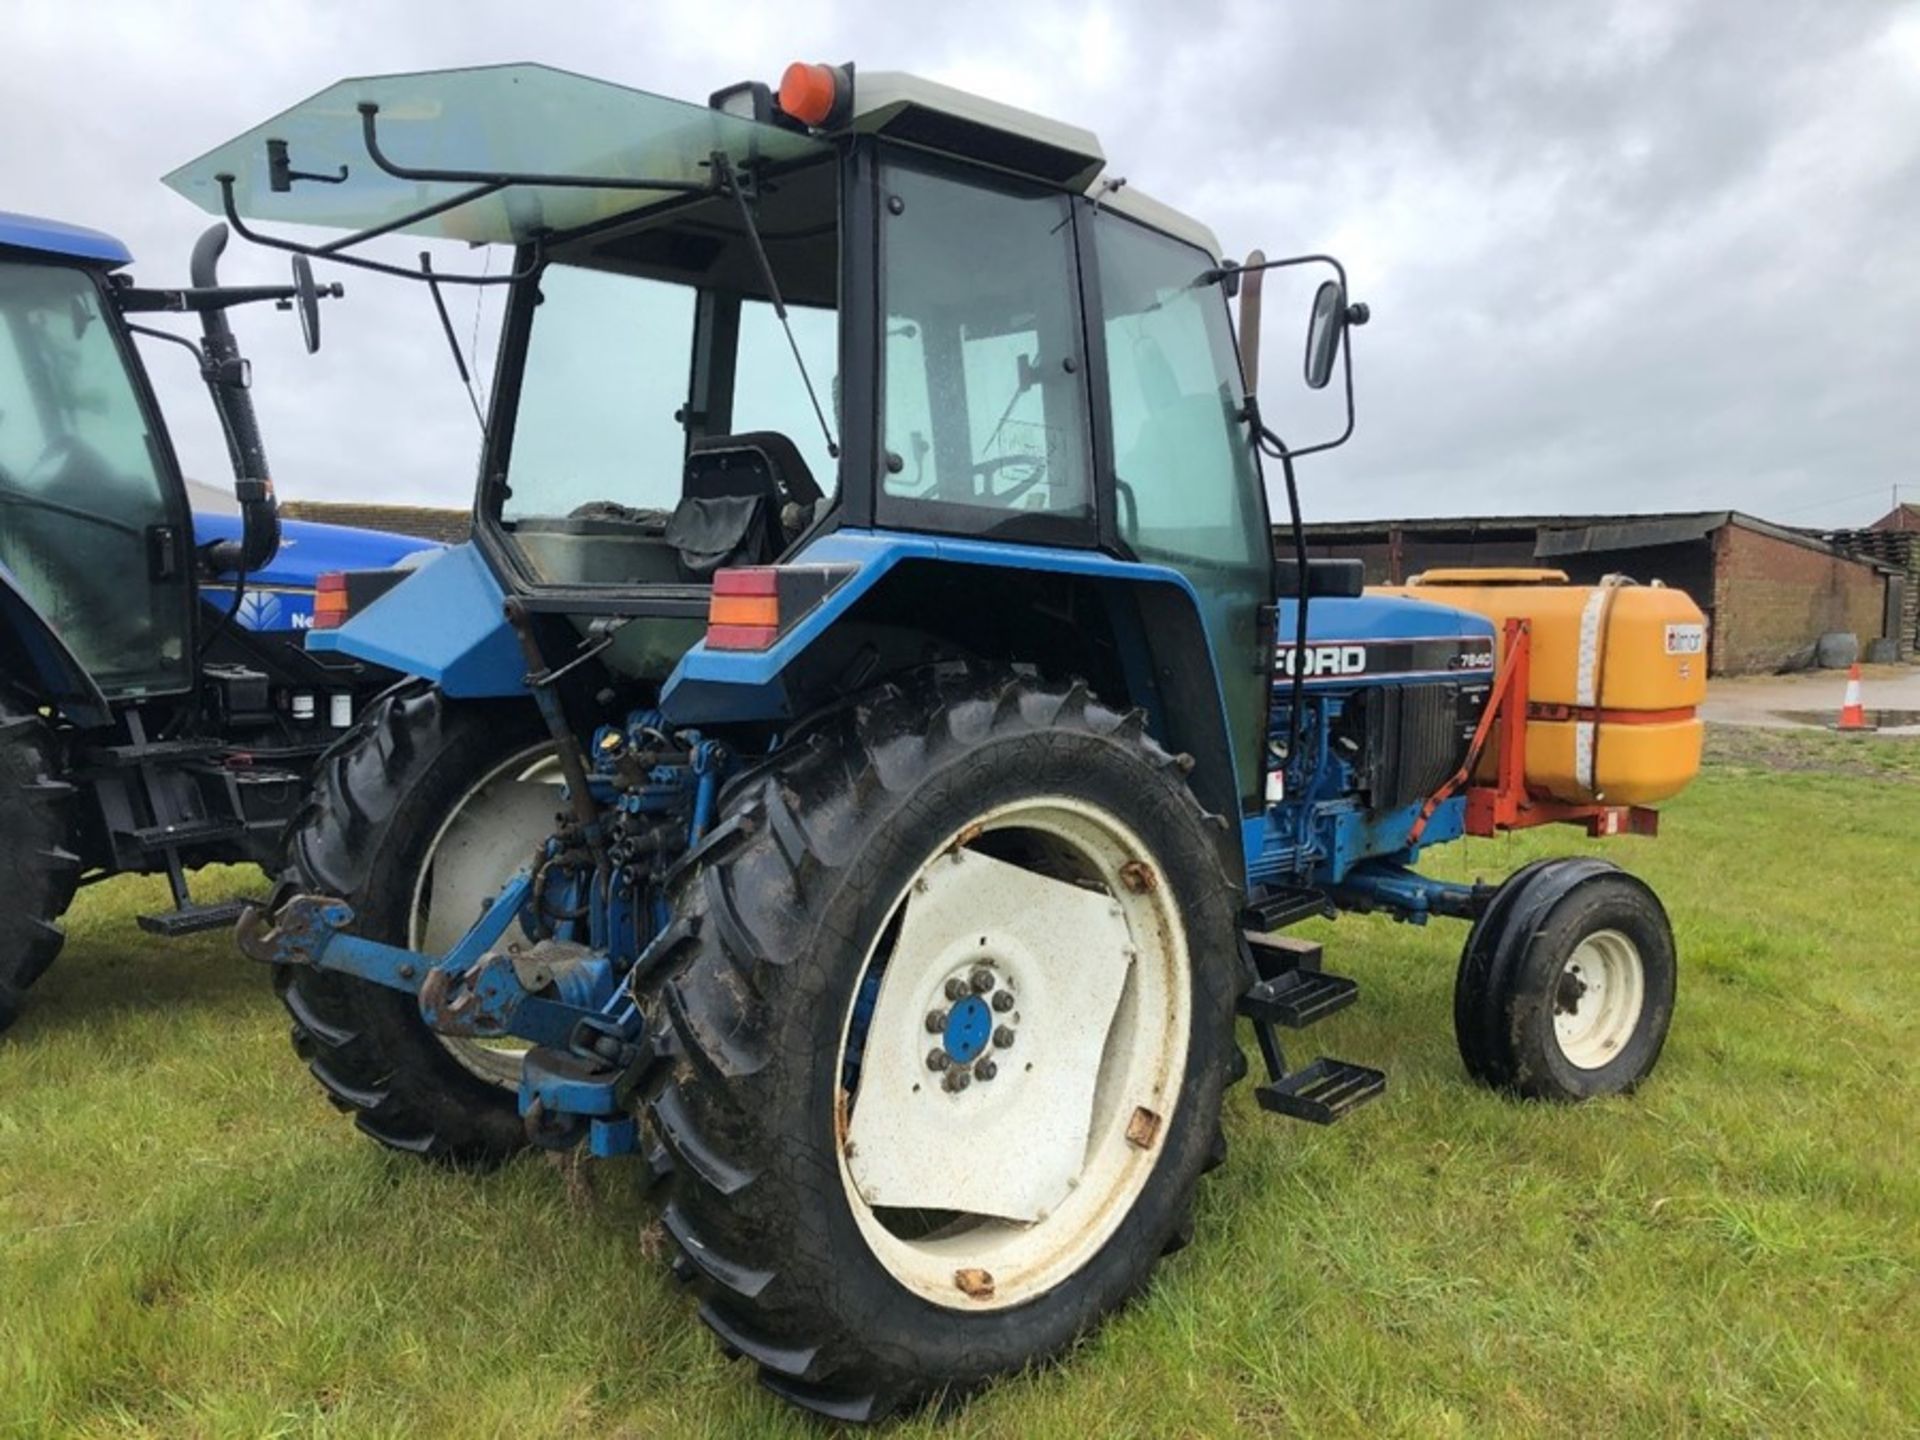 (94) Ford 7840 Powerstar SL 2wd tractor, 4,551 hours, dual power. air con, Reg L56 UVL, Rear 13.6 - Image 9 of 11